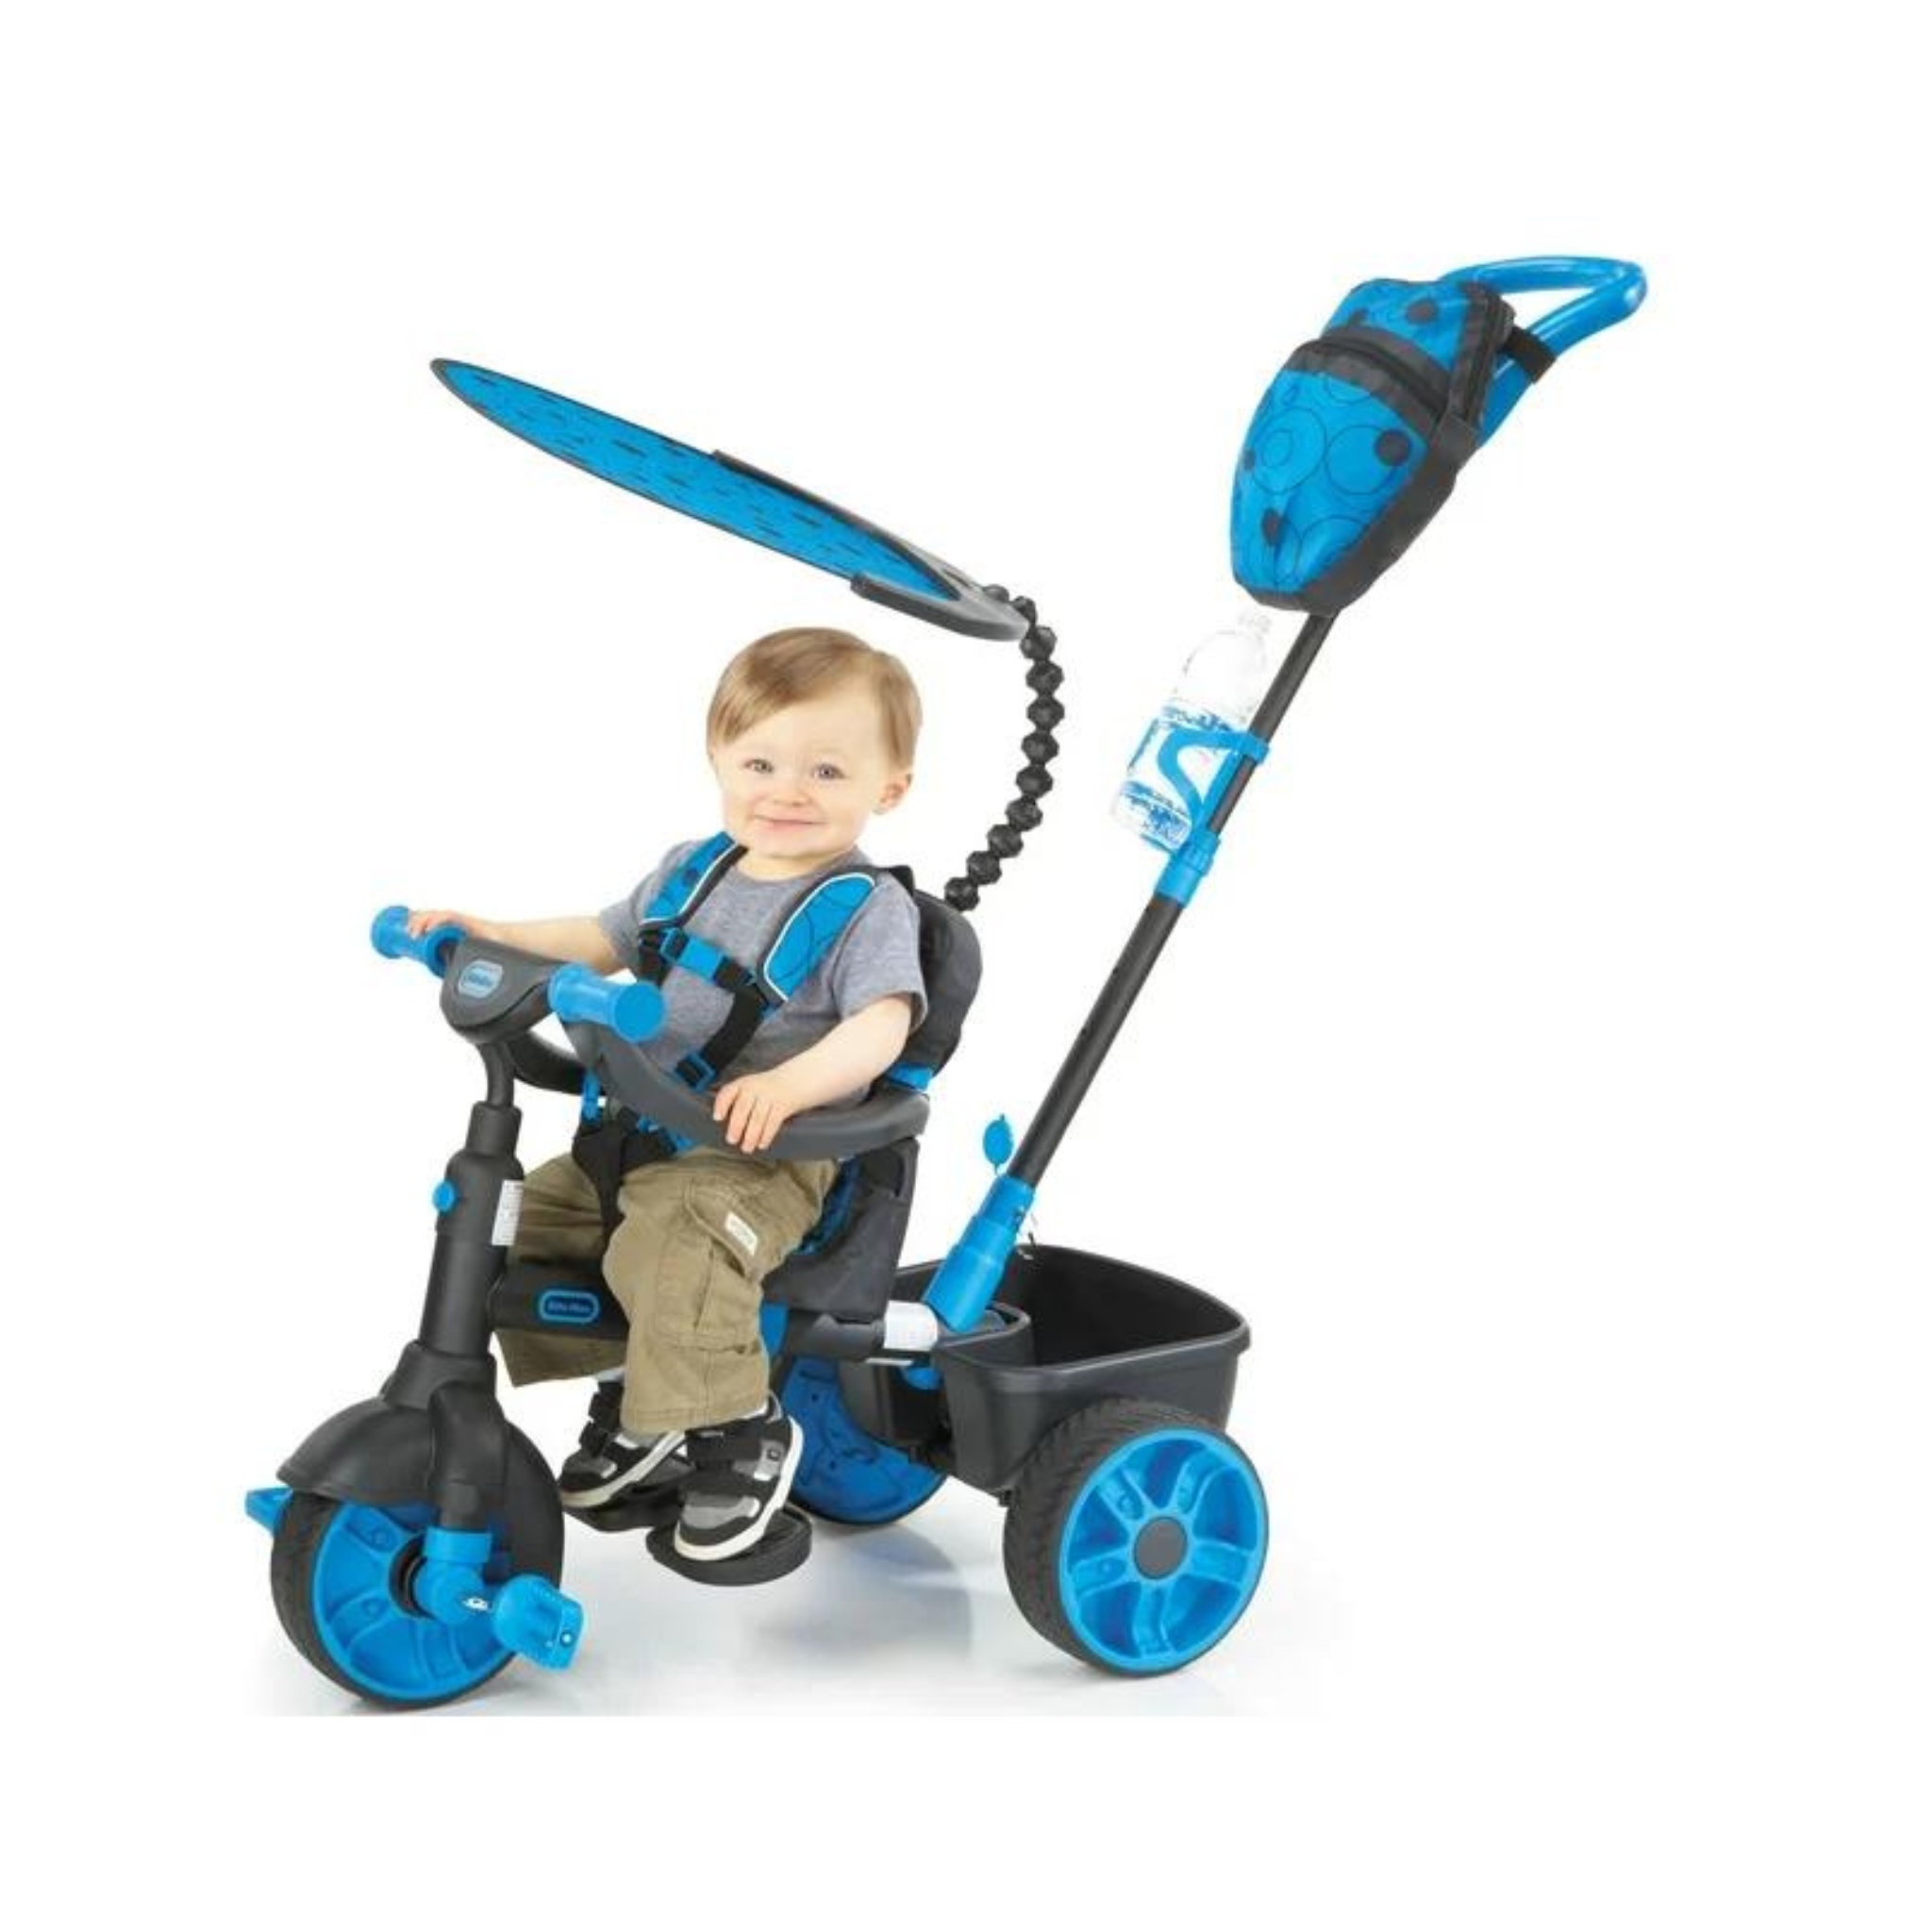 Little Tikes 4-in-1 Deluxe Edition Trike (2 Colors)